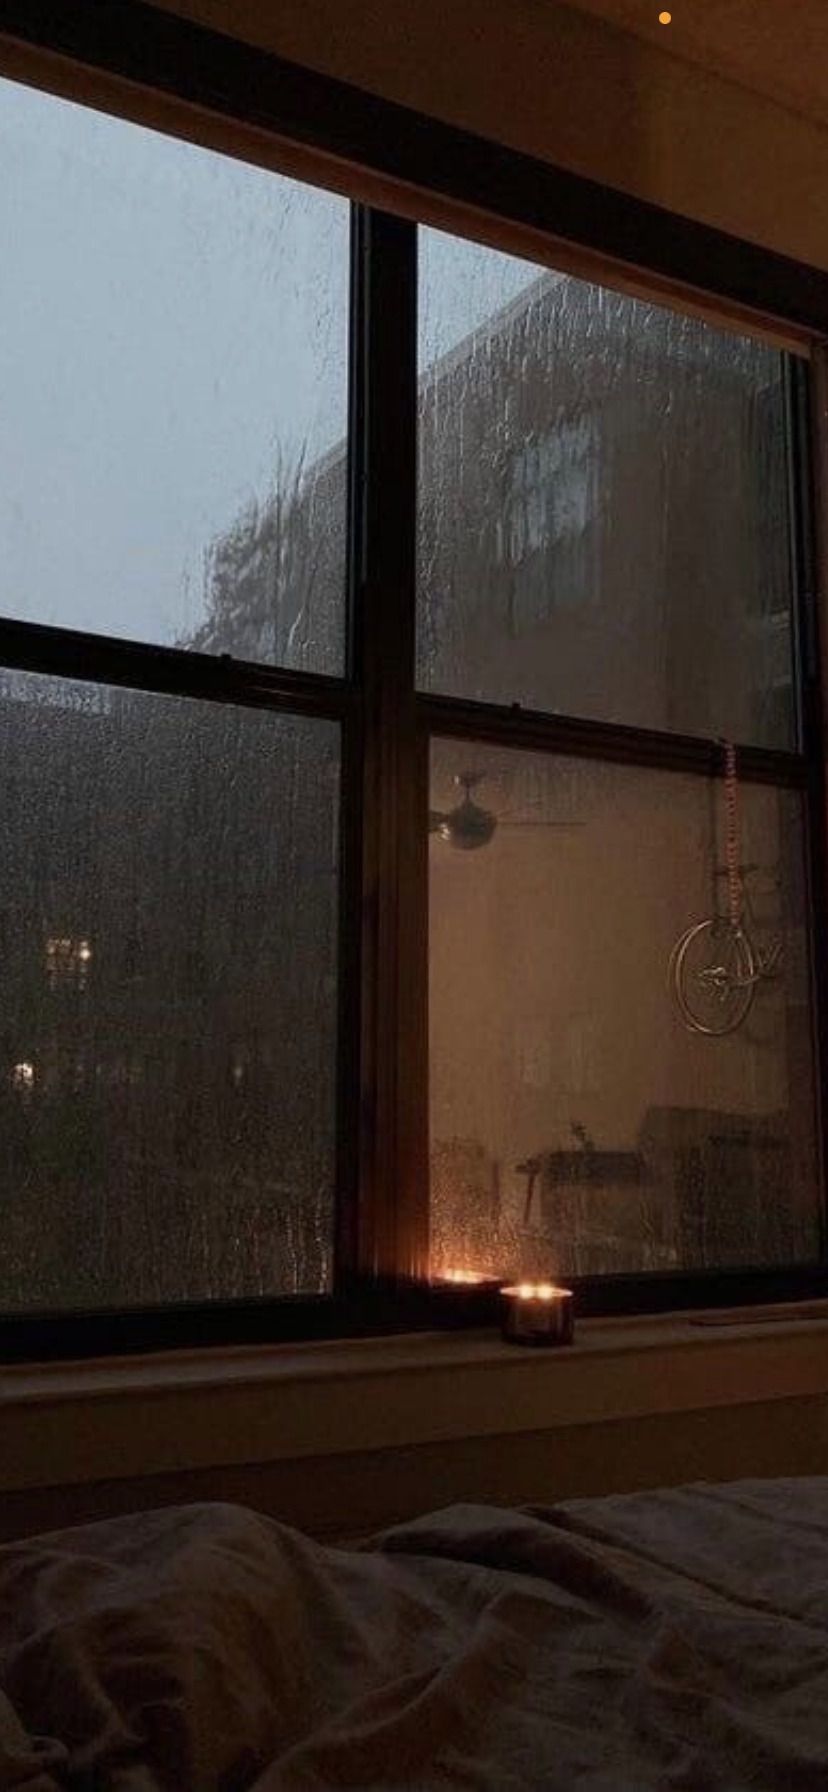 A bedroom with a candle on the windowsill - Rain